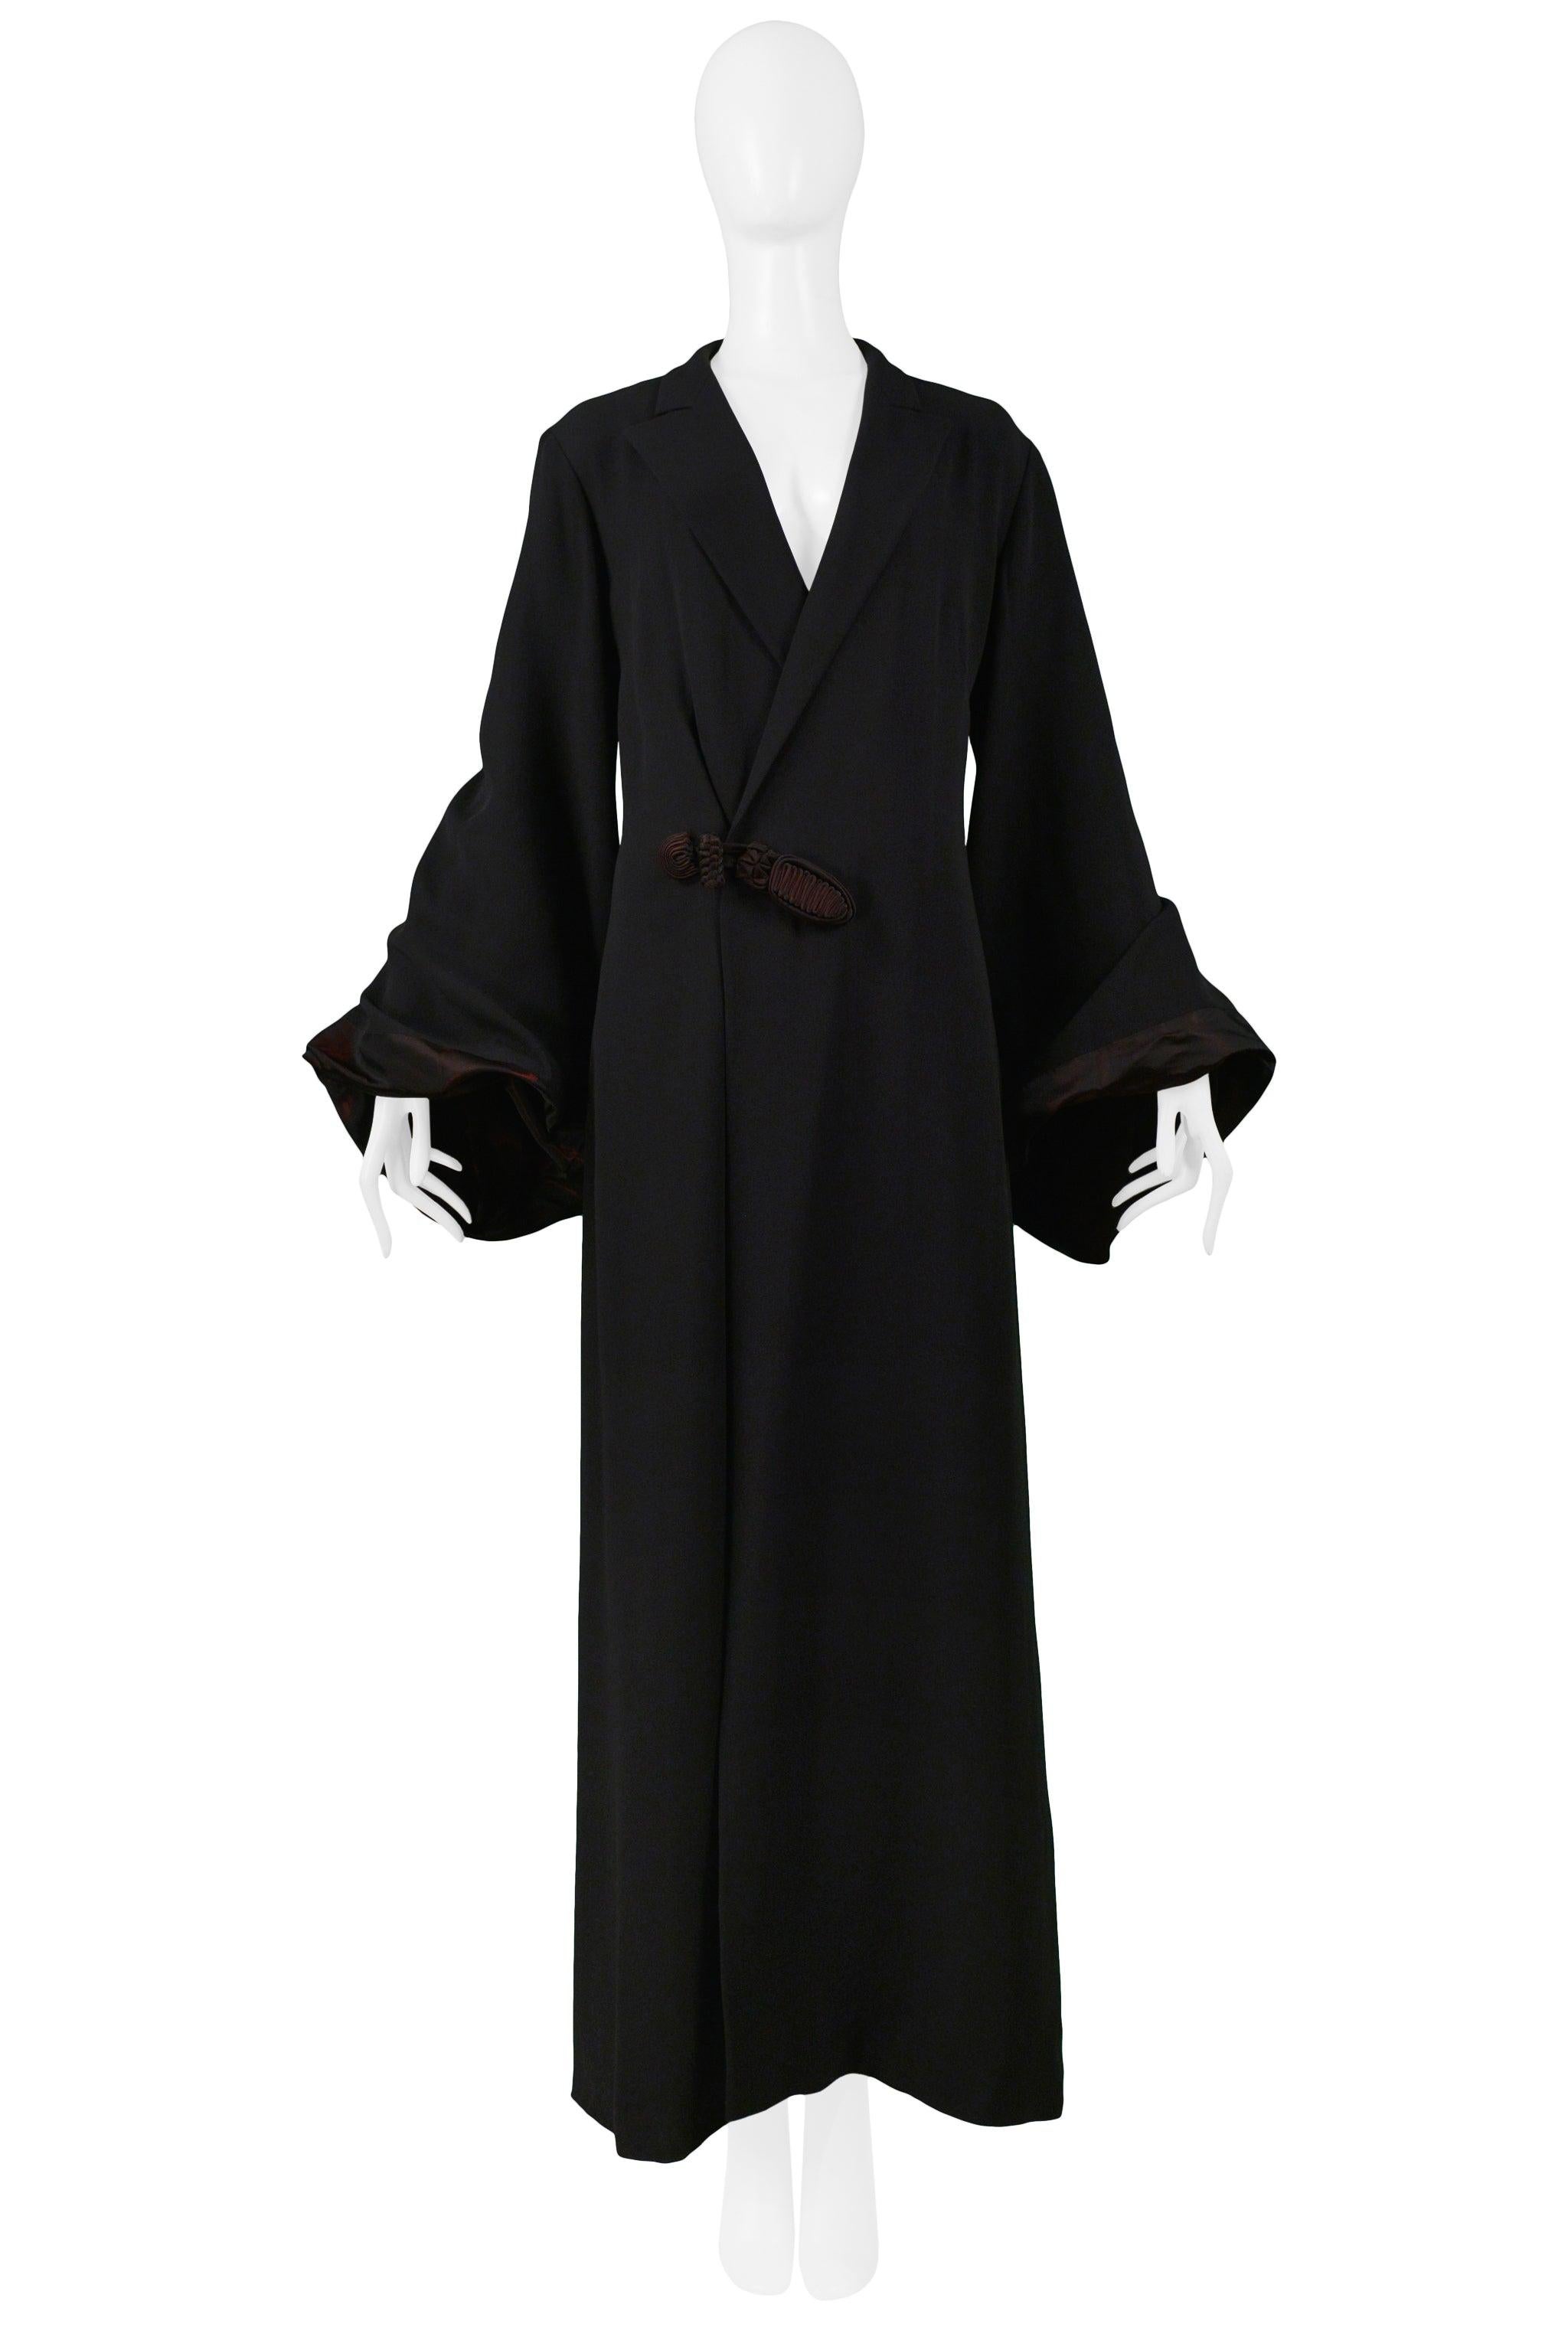 Resurrection Vintage is excited to offer a vintage Jean Paul Gaultier long black kimono robe with front frog closure, taffeta-lined twisted bell sleeves, and burgundy taffeta lining.

Jean Paul Gaultier
Size 46
Acetate; Cotton; Rayon
Excellent